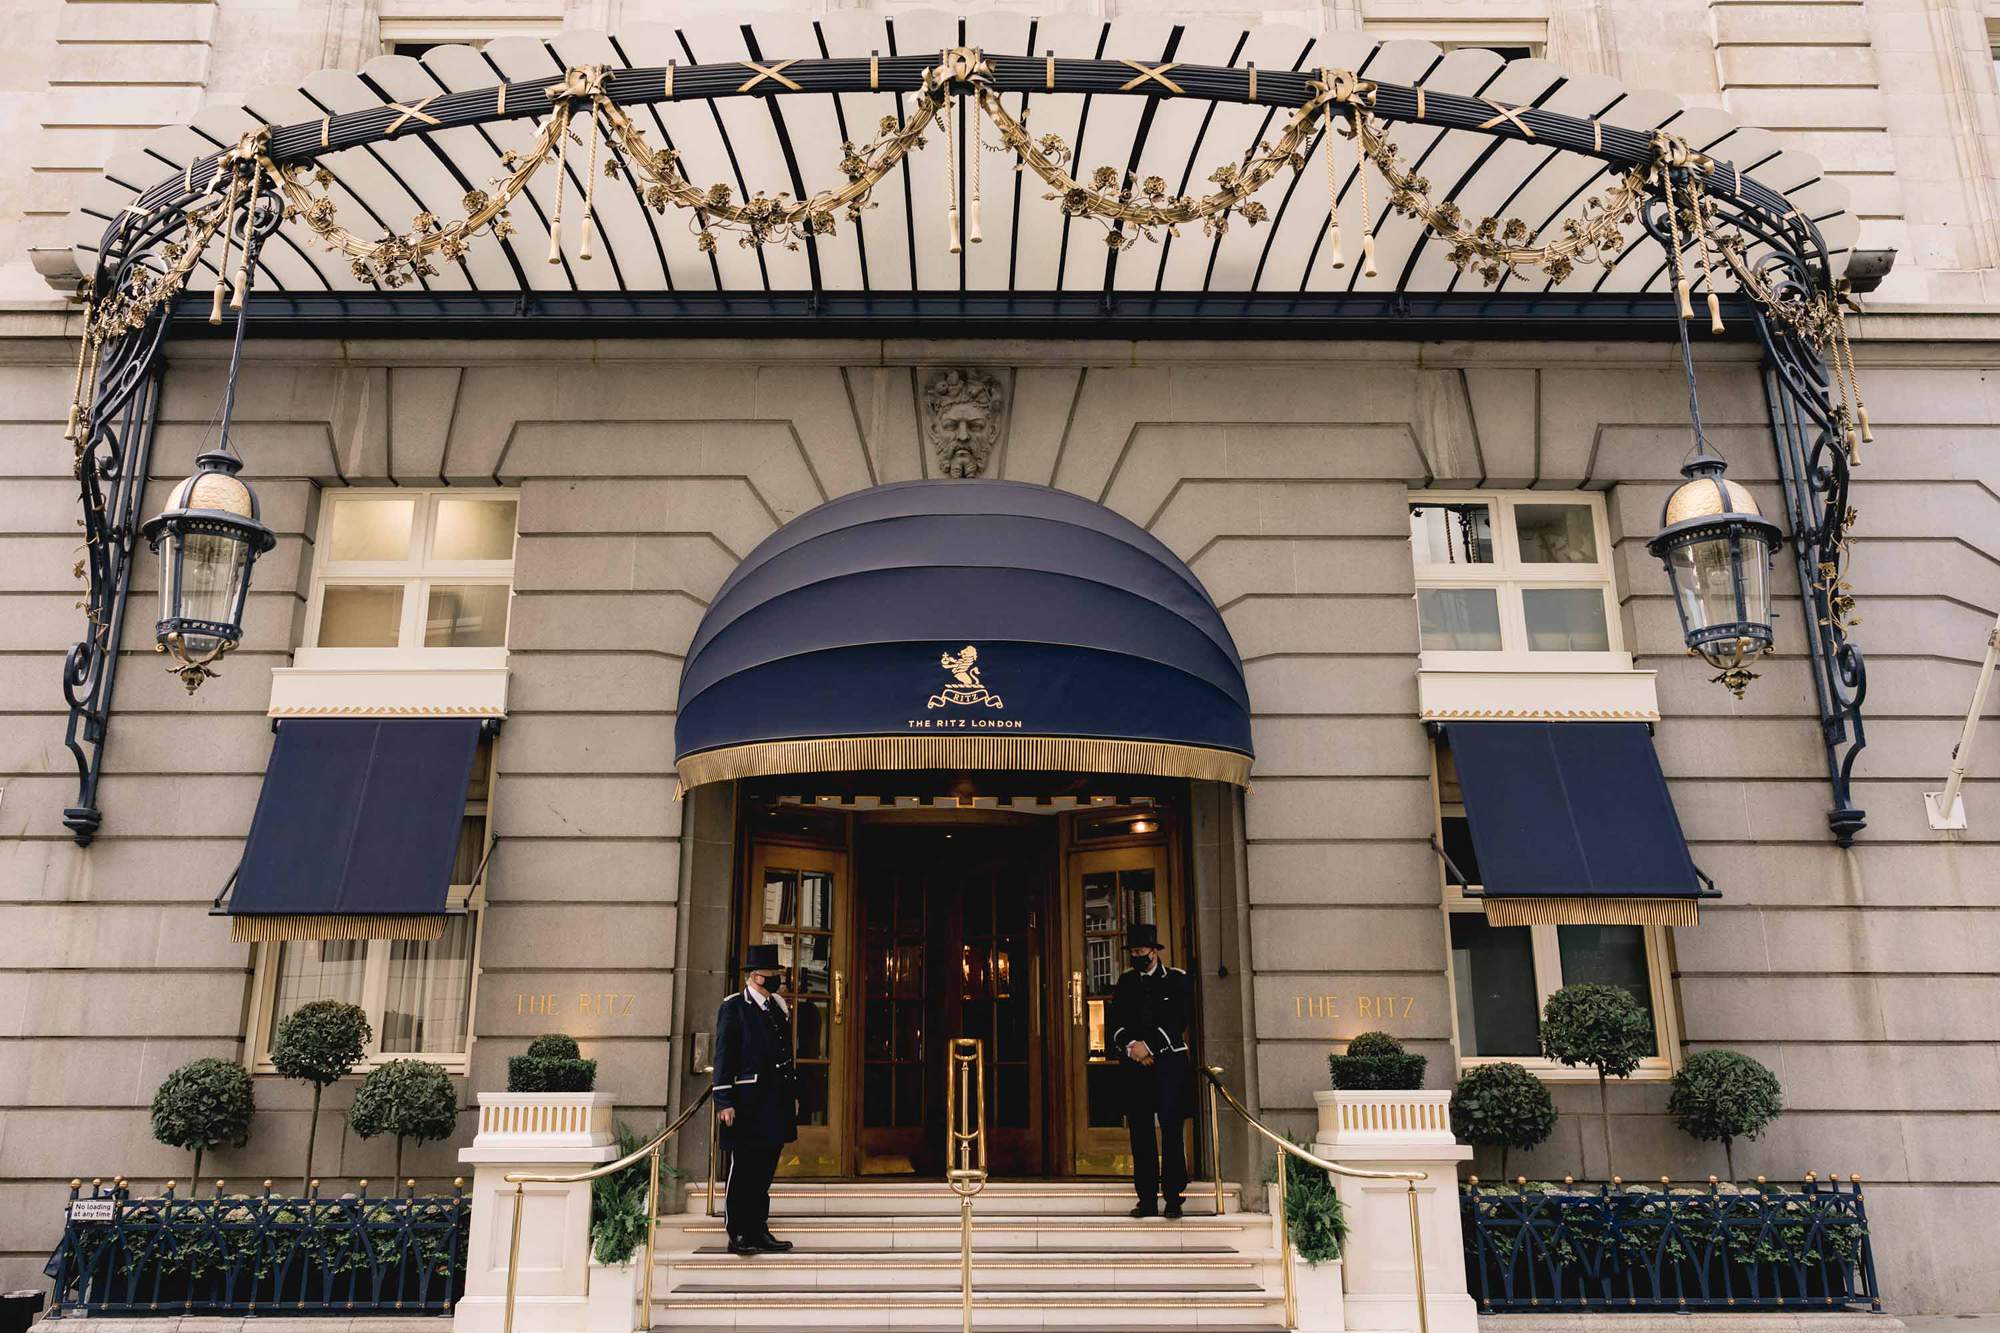 The entrance to the Ritz hotel wedding venue in Mayfair, London.